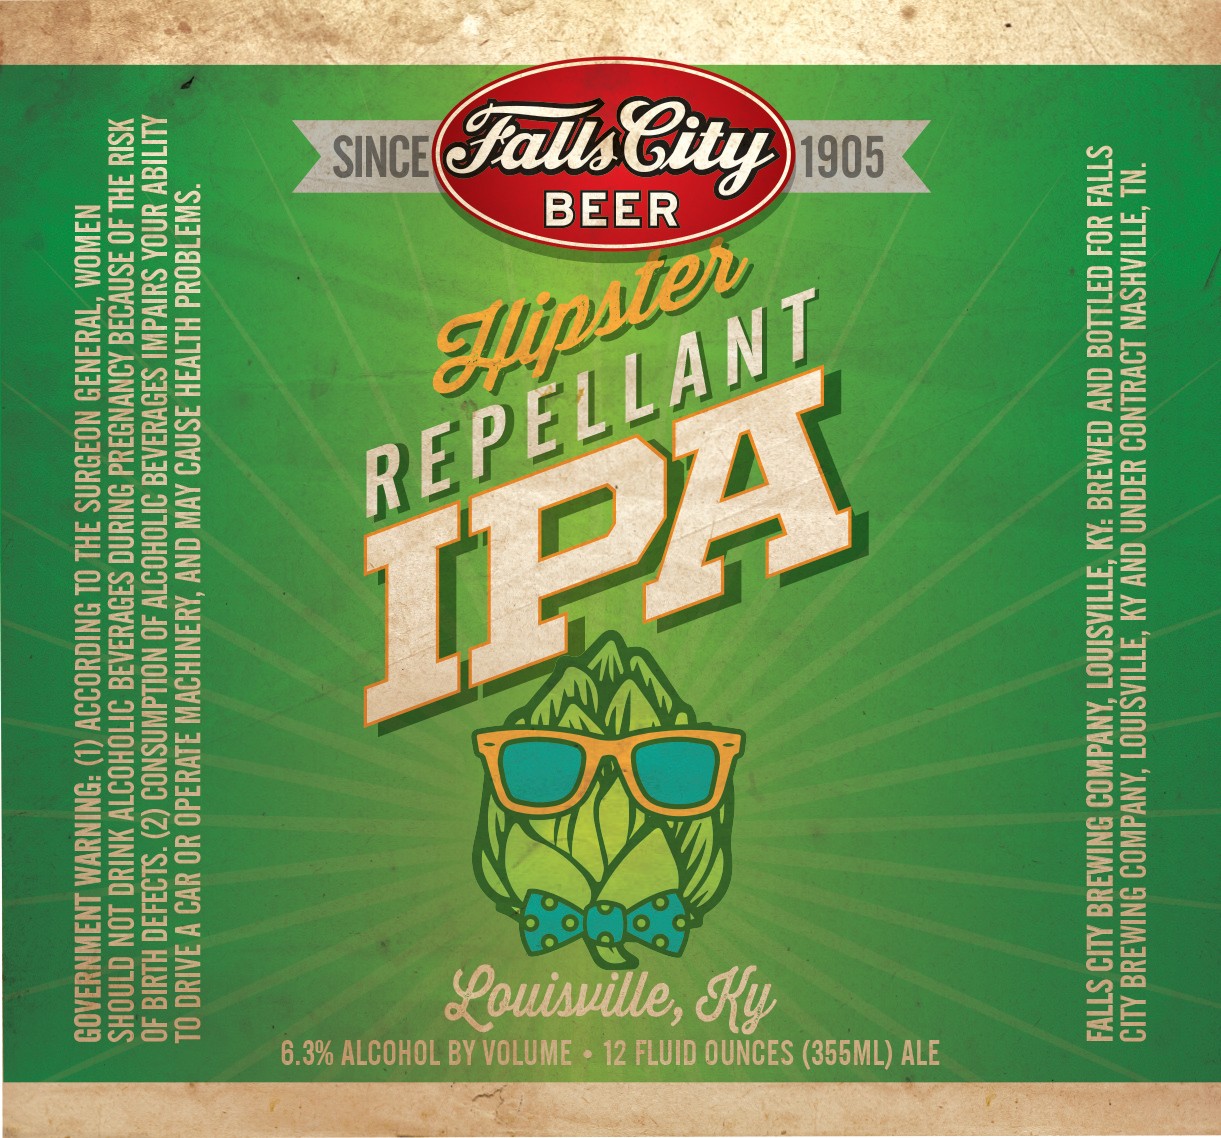 The label for Falls City's Hipster Repellant IPA